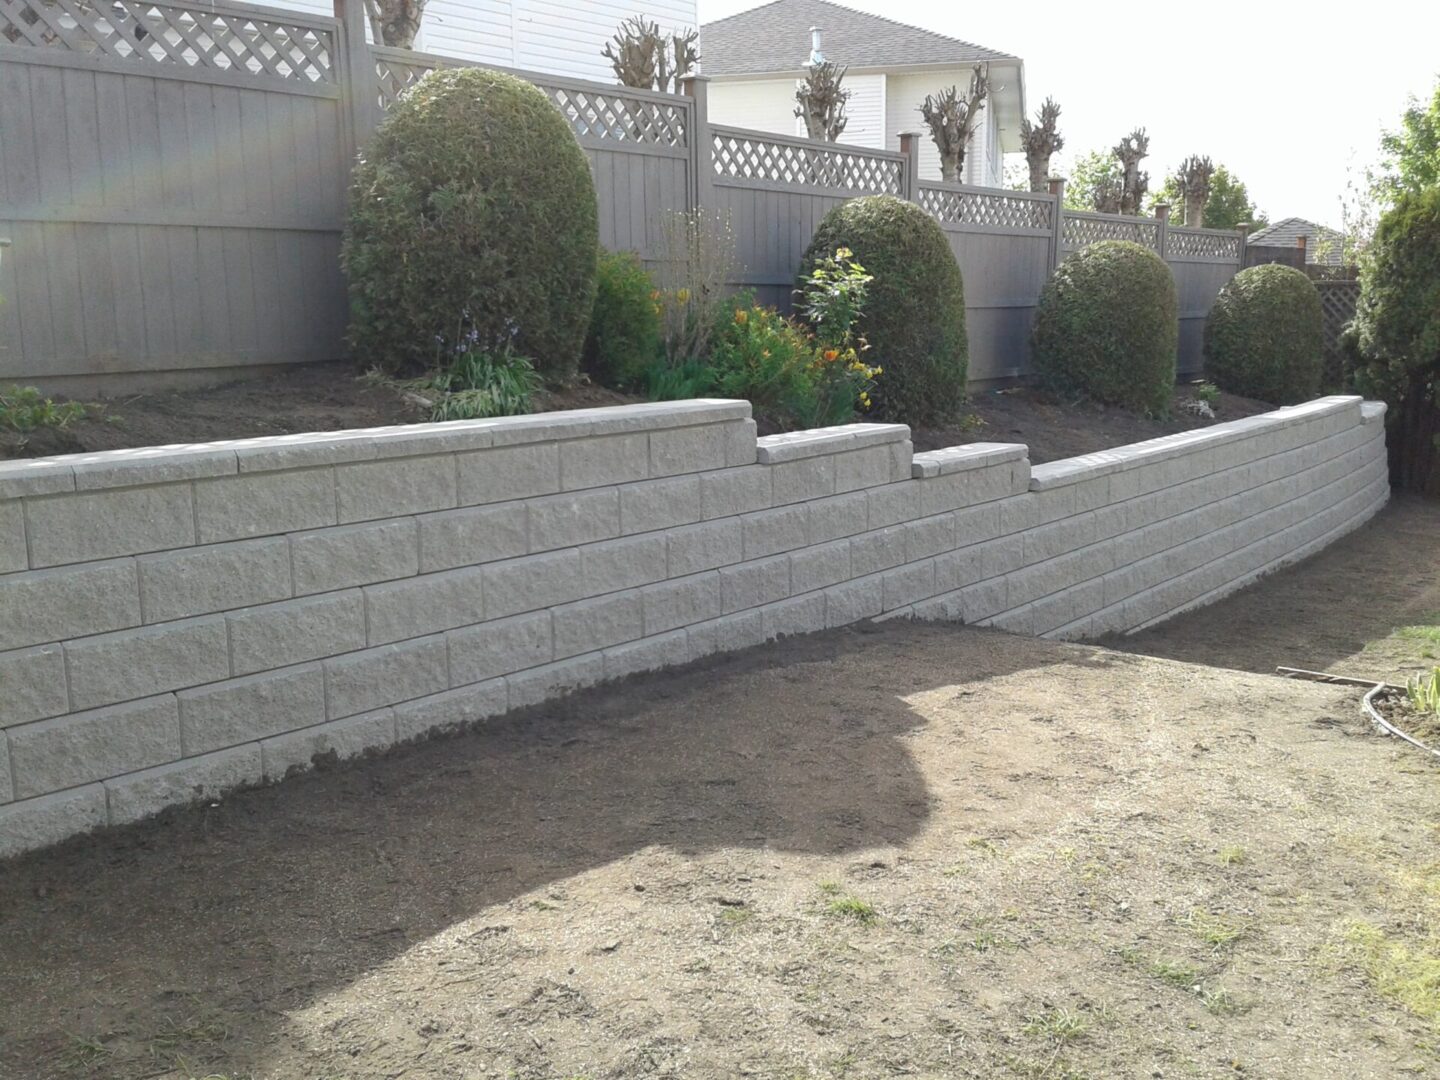 A landscaped backyard featuring a gray stone retaining wall, with shrubs and a tree behind the wall, and a grassless dirt area in the foreground.